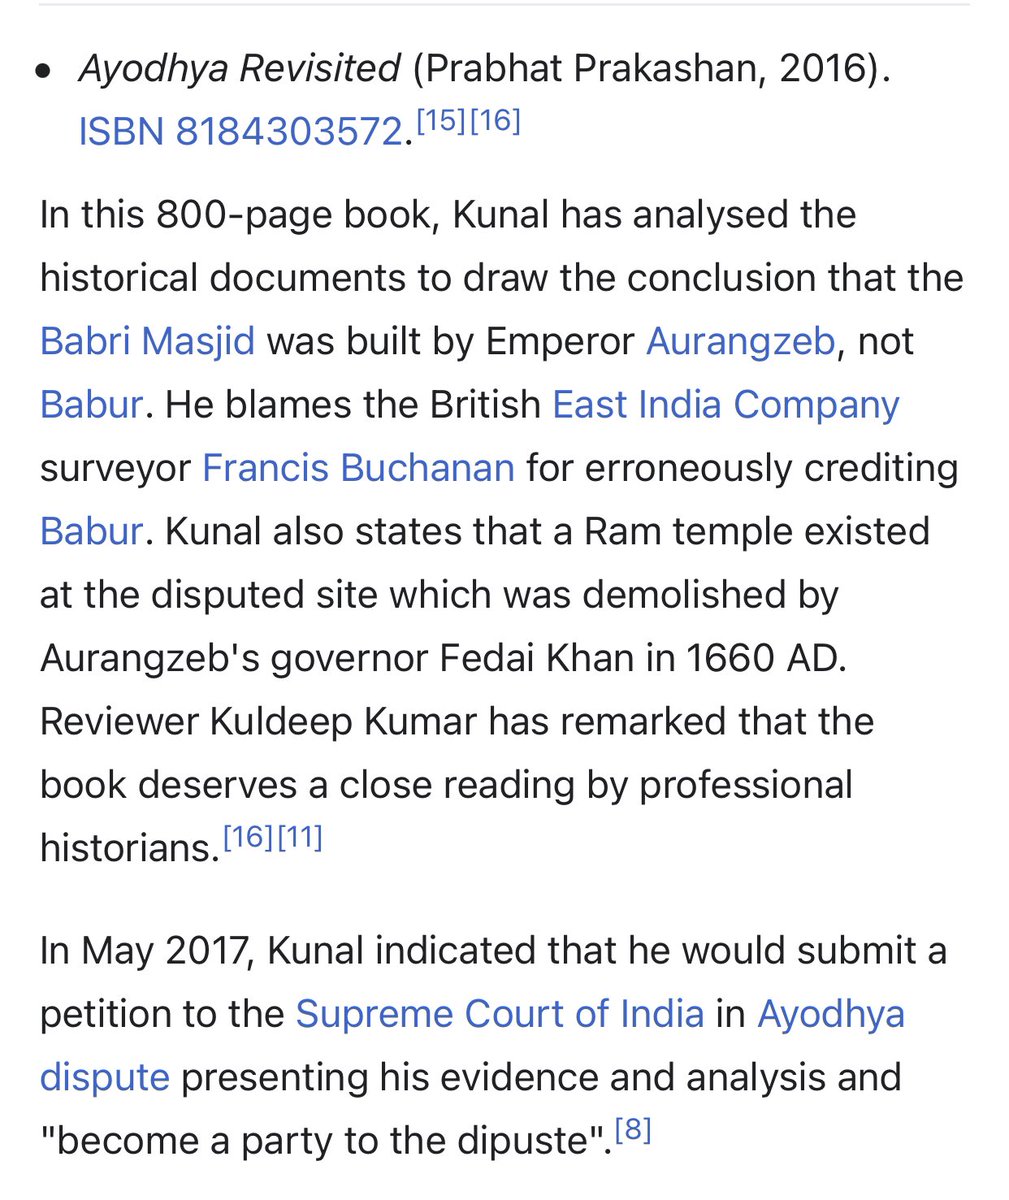 3. Kishore Kunal, the only “expert” to question the Benaras Farman, in fact accepts in his book “Ayodhya Revisited” that owing to the ineligibility of the date written on the document, the date could be - as Sarkar surmised - 1659.Mr. Kunal is also known for his maverick views.